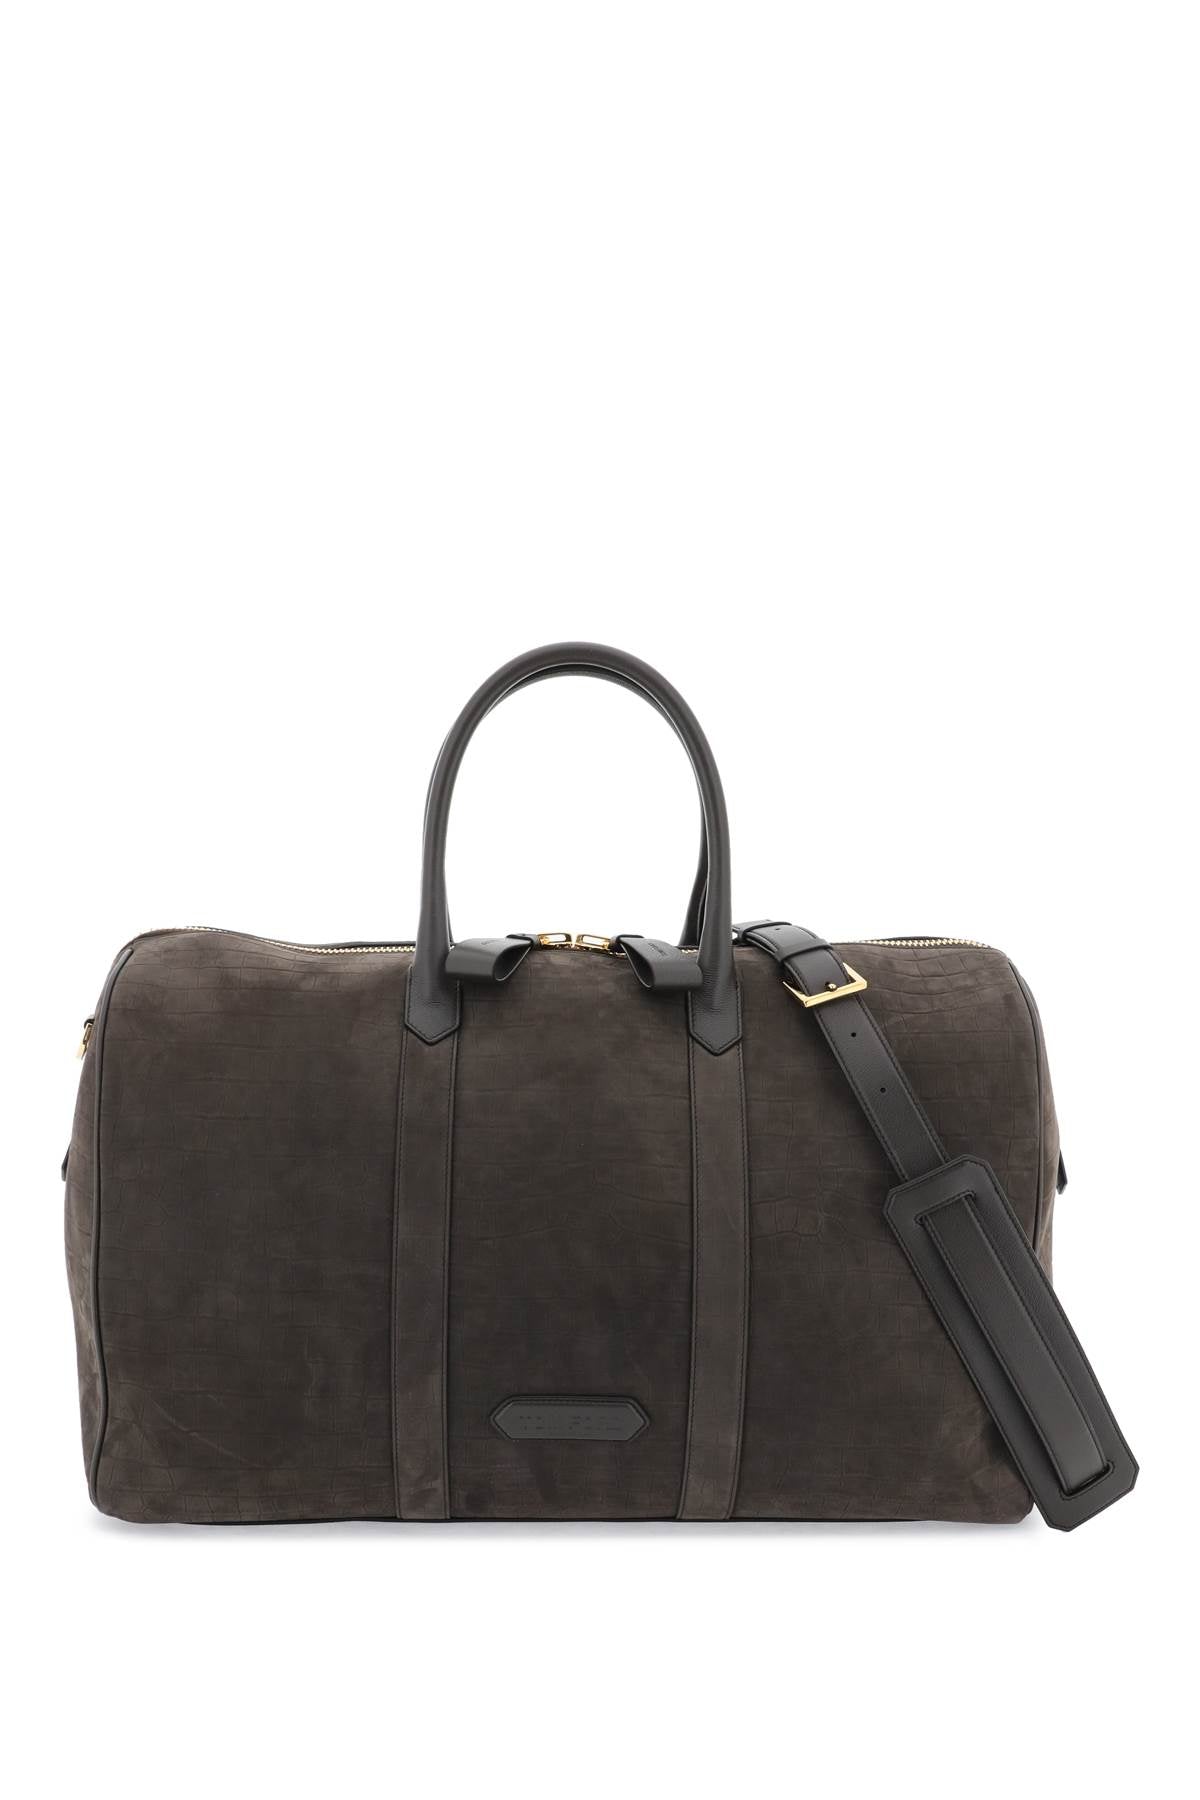 TOM FORD Suede Duffle Handbag for Men in Brown - SS24